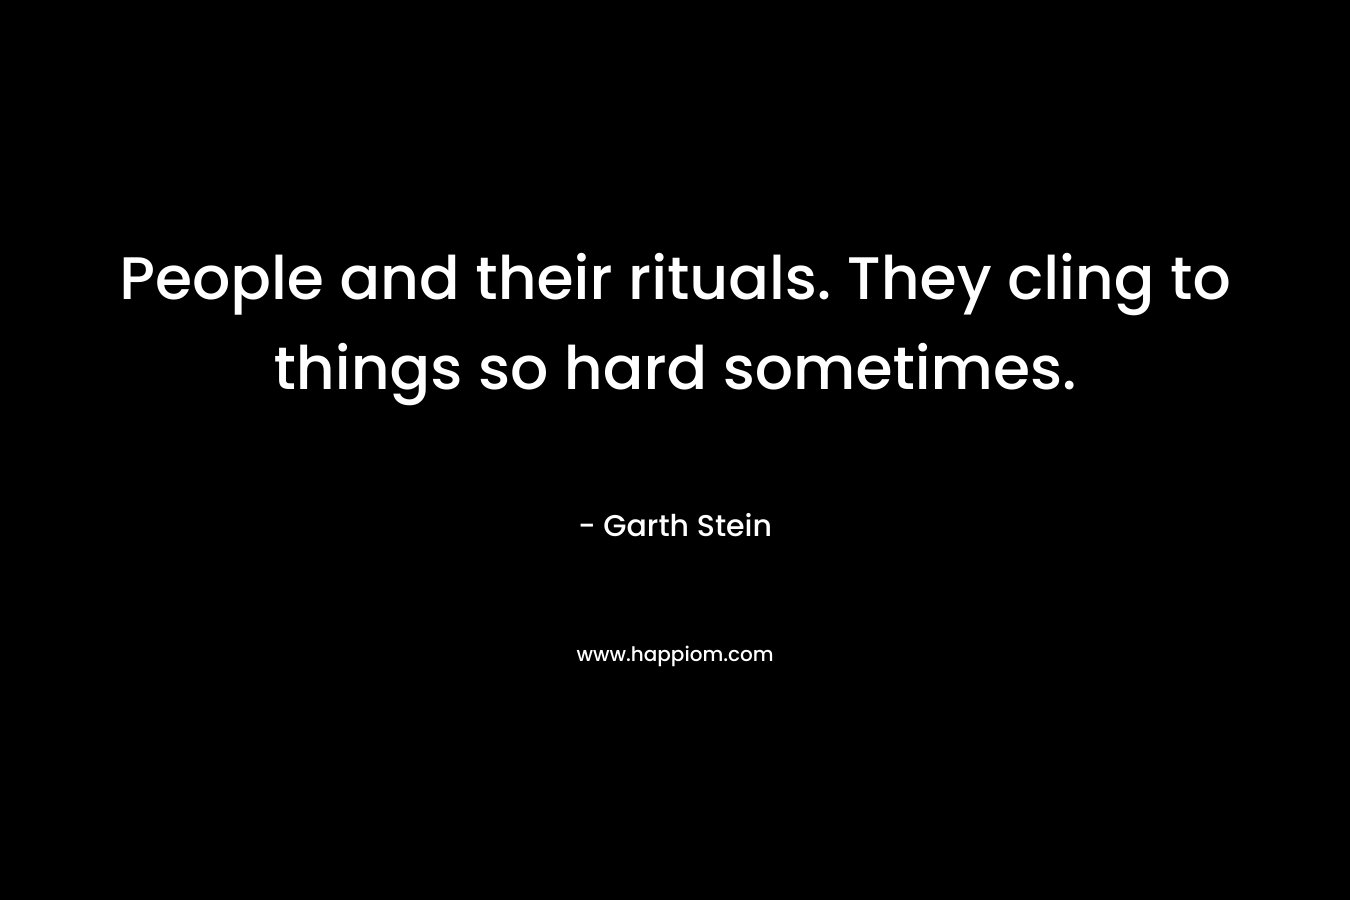 People and their rituals. They cling to things so hard sometimes. – Garth Stein